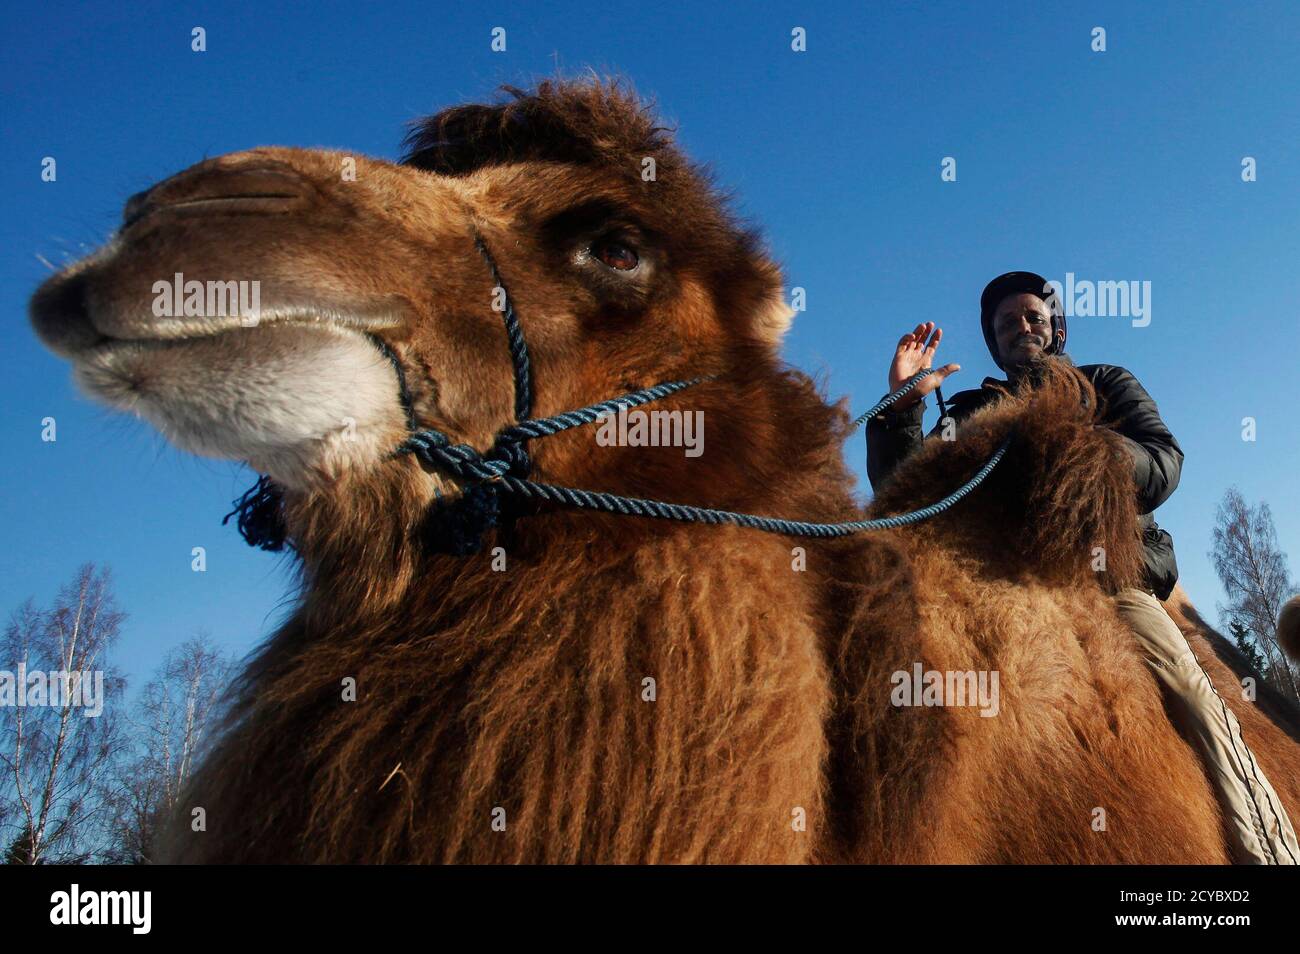 Somali camel herder Ali Abdullahi Hassan, 40, waves as he takes a Bactrian  camel for a ride through the snowy countryside near the rural town of  Gyttorp March 3, 2011. Ali emigrated